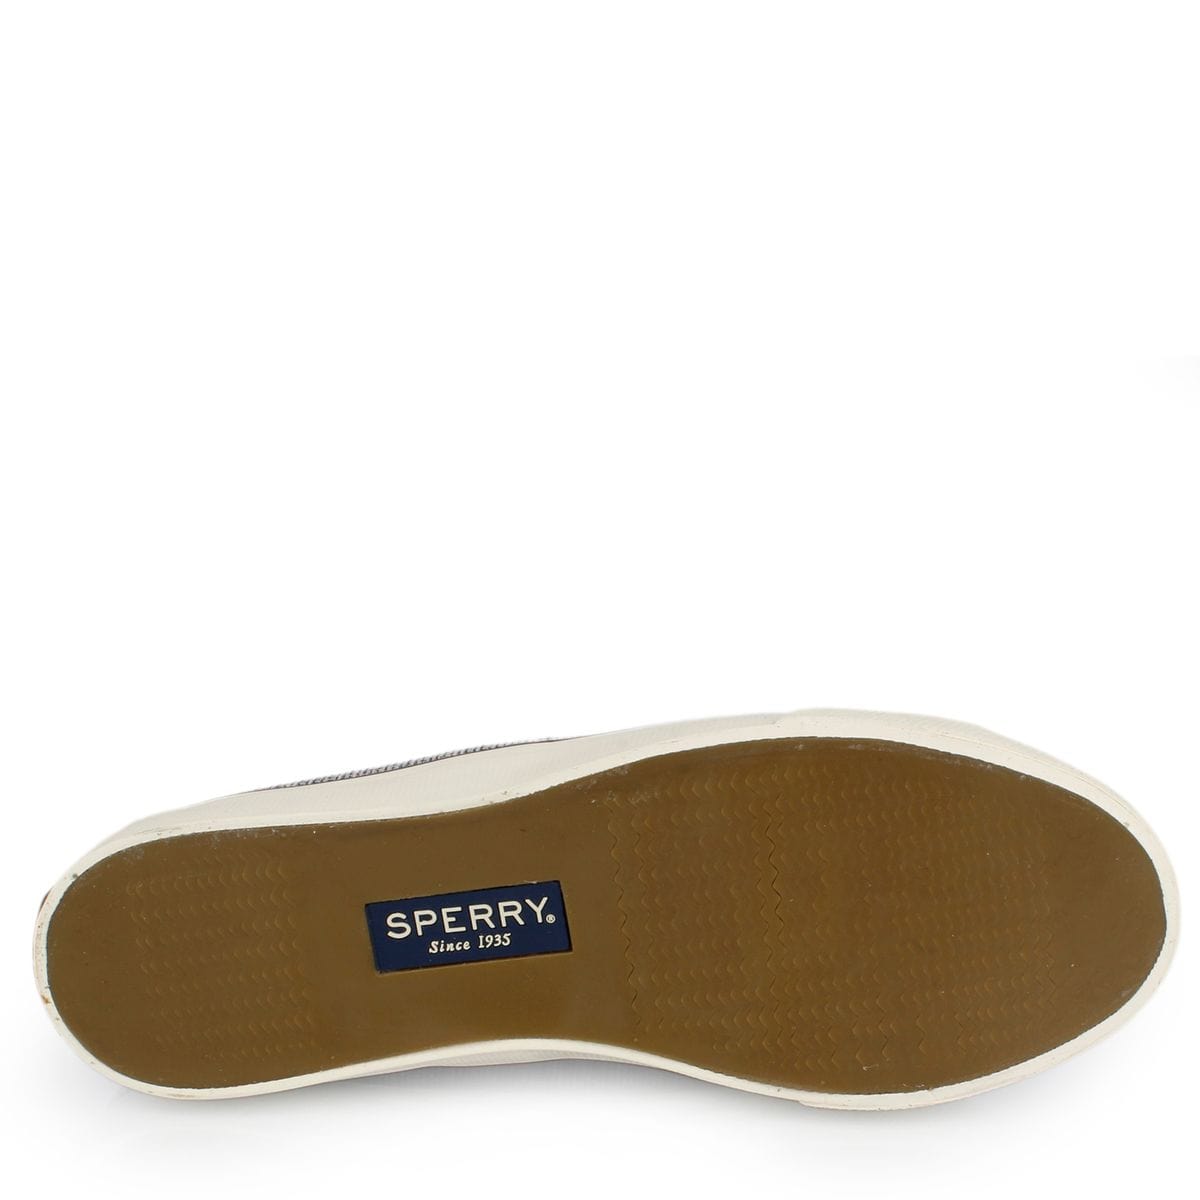 Sperry Top Sider Womens Shoes 37.5 Seacoast Cross Hatch